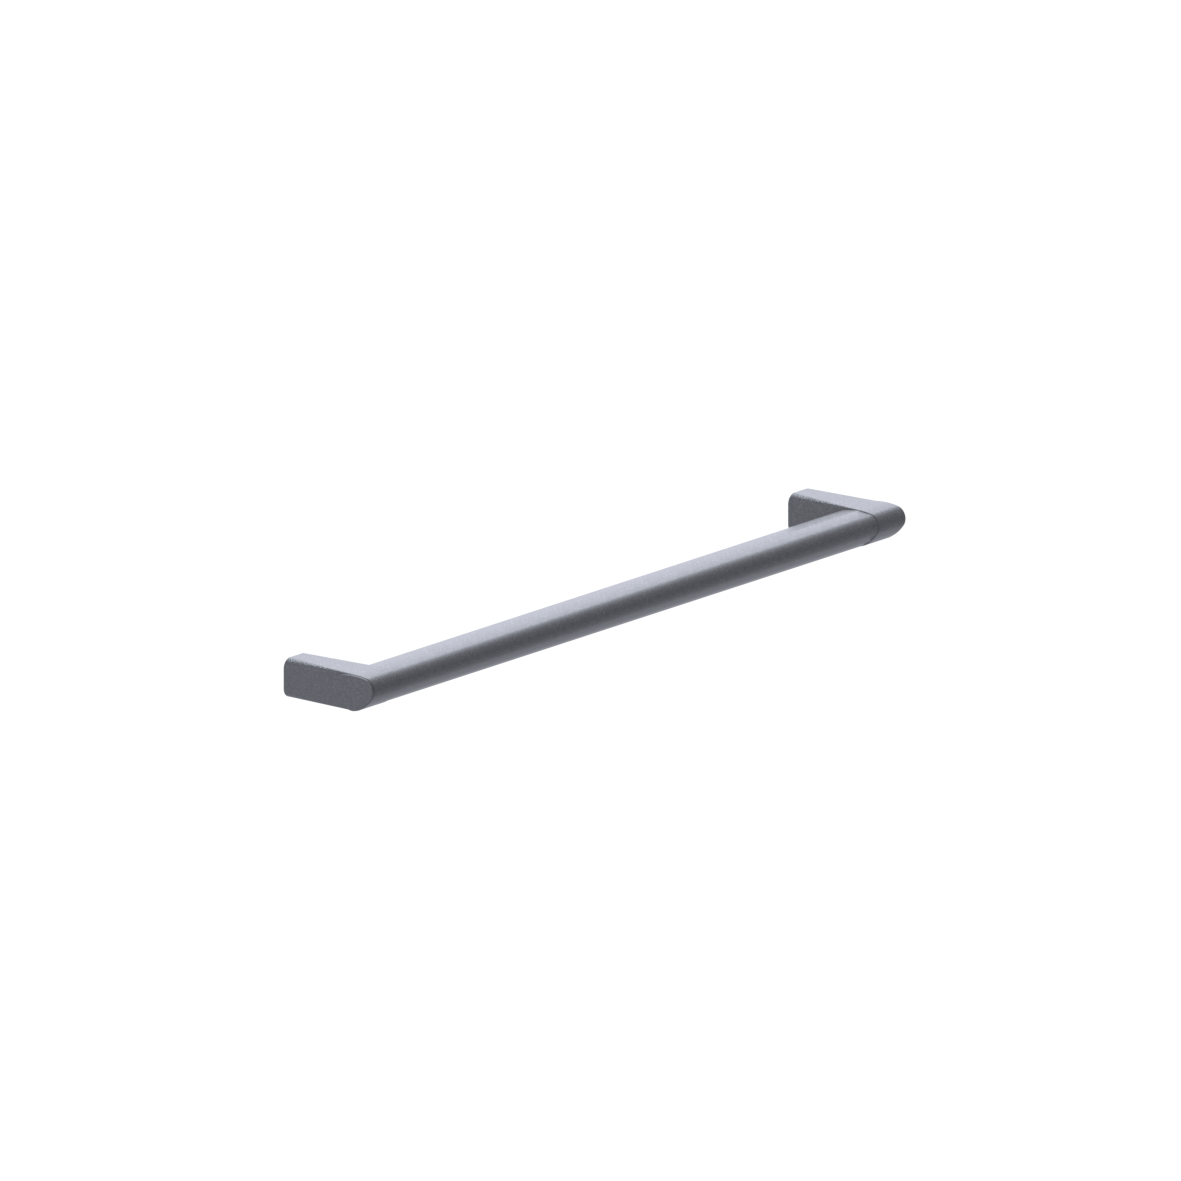 Cavere Care Shower handrail, 600 mm, single-point mounting, Cavere Metallic anthracite